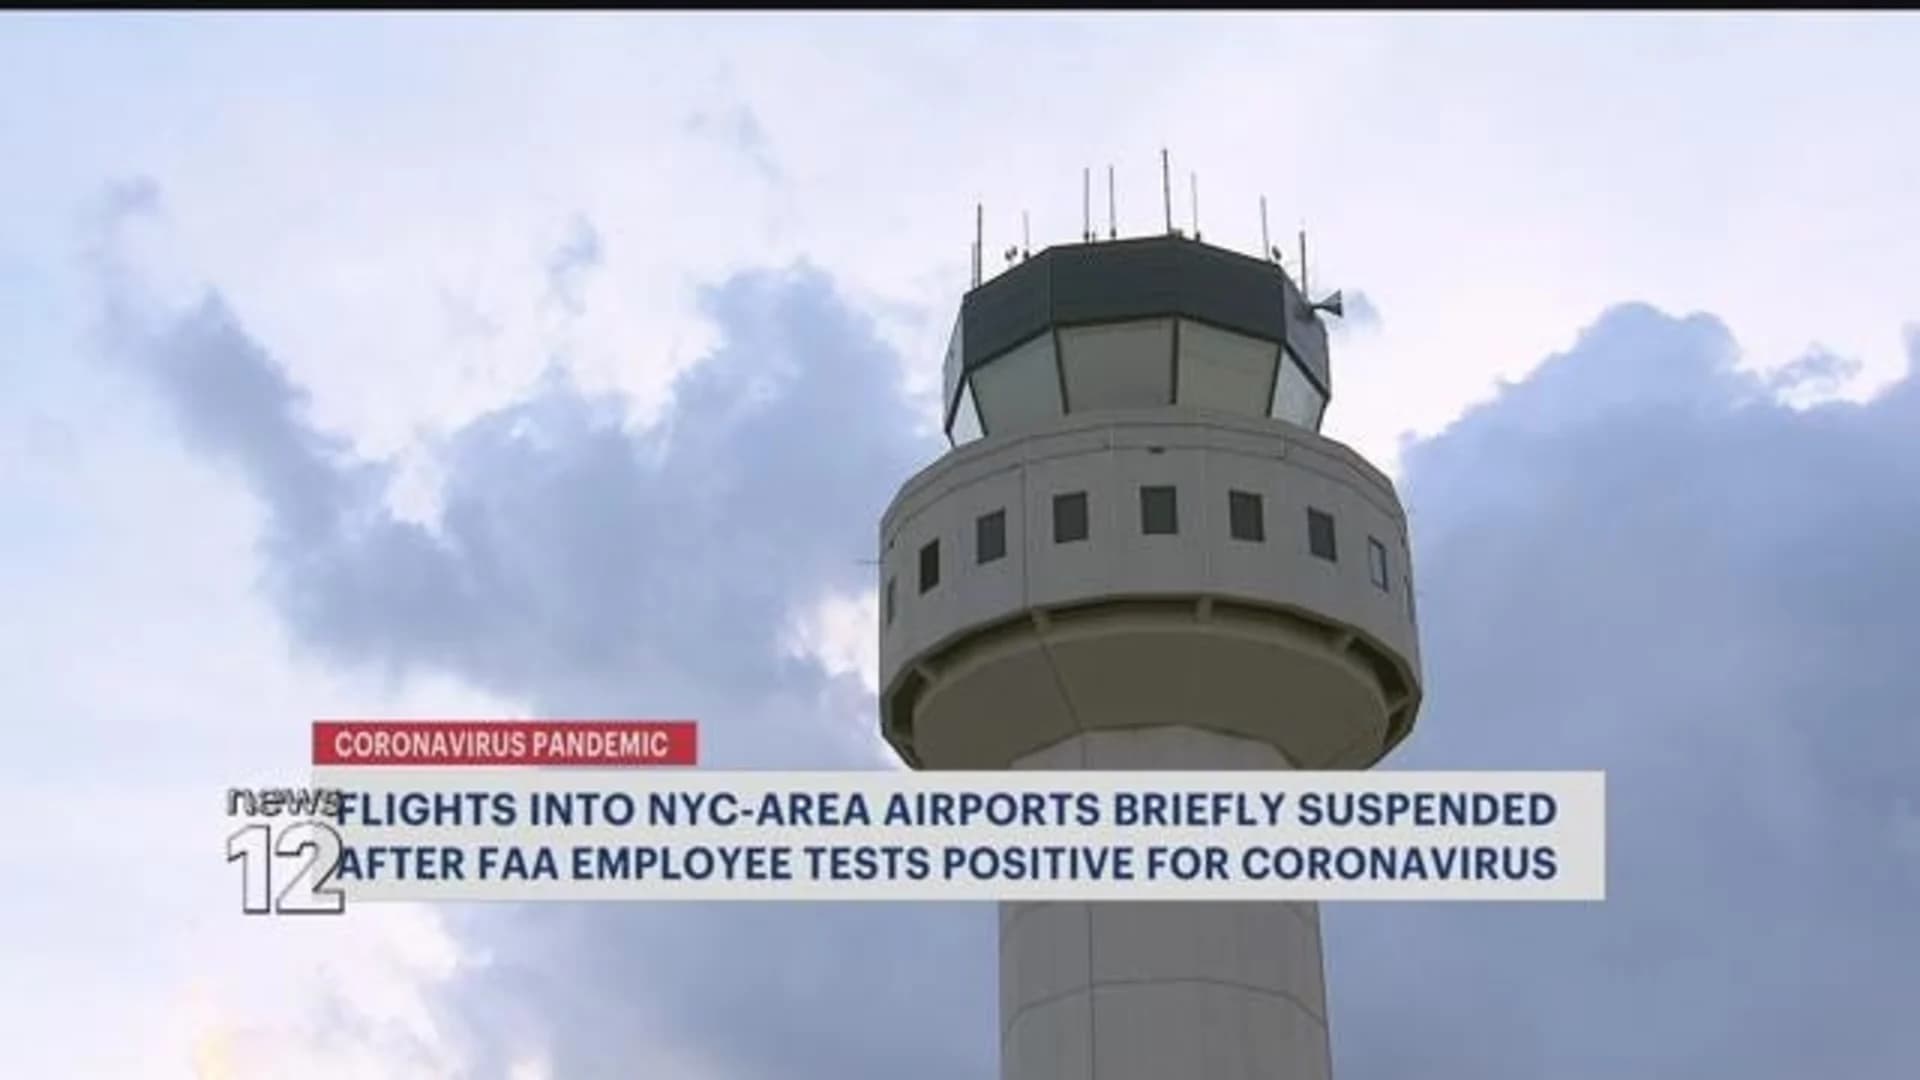 FAA lifts brief virus-related suspension of flights to NYC-area airports